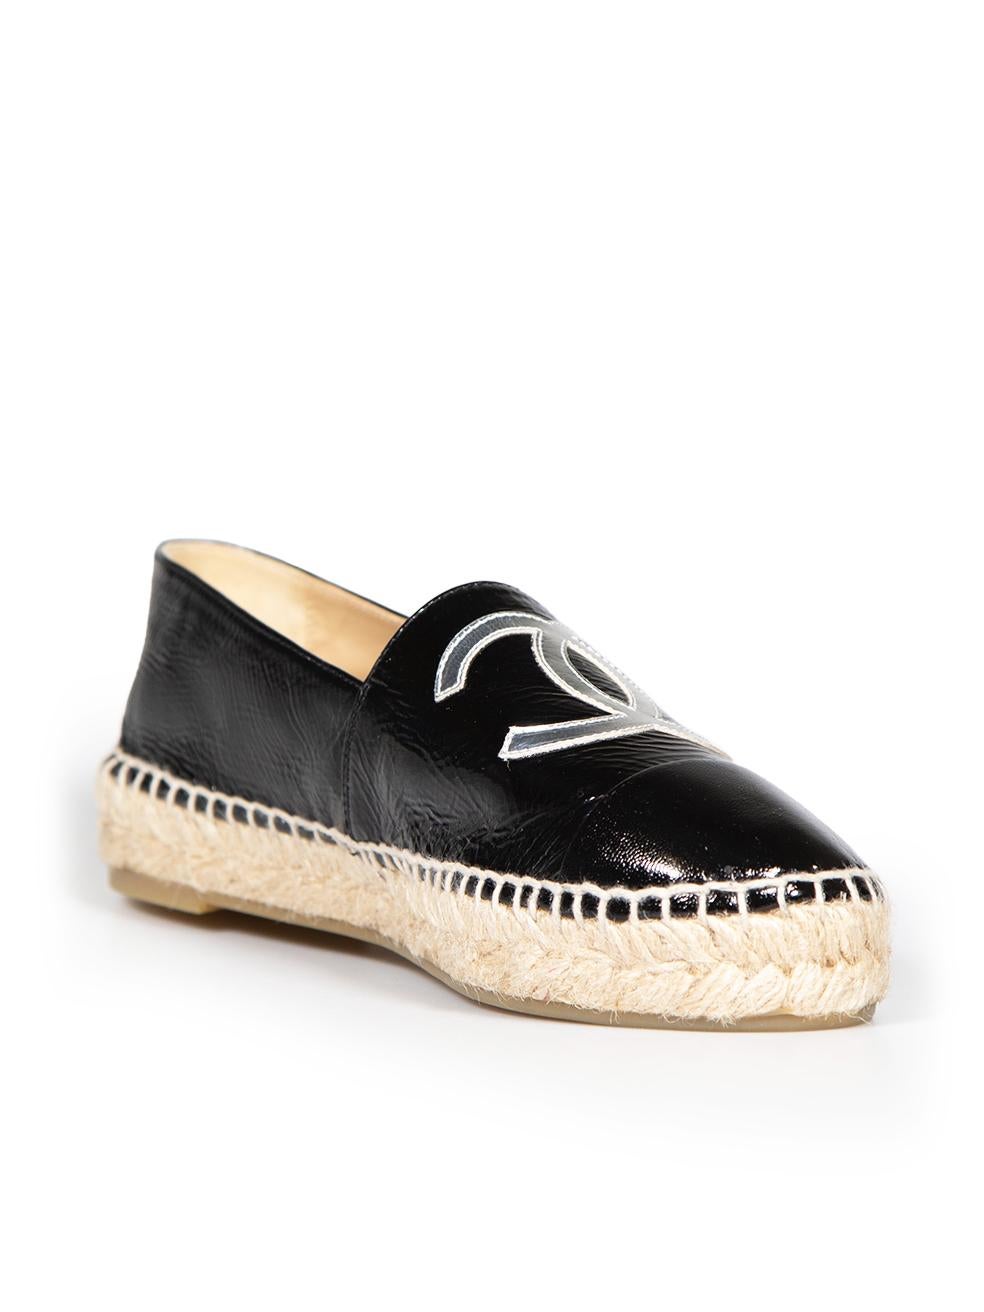 CONDITION is Very good. Hardly any visible wear to espadrilles is evident on this used Chanel designer resale item.
 
 
 
 Details
 
 
 Black
 
 Leather
 
 Espadrilles
 
 Silver interlocking CC logo toe
 
 Slip on
 
 Round toe
 
 
 
 
 
 Made in